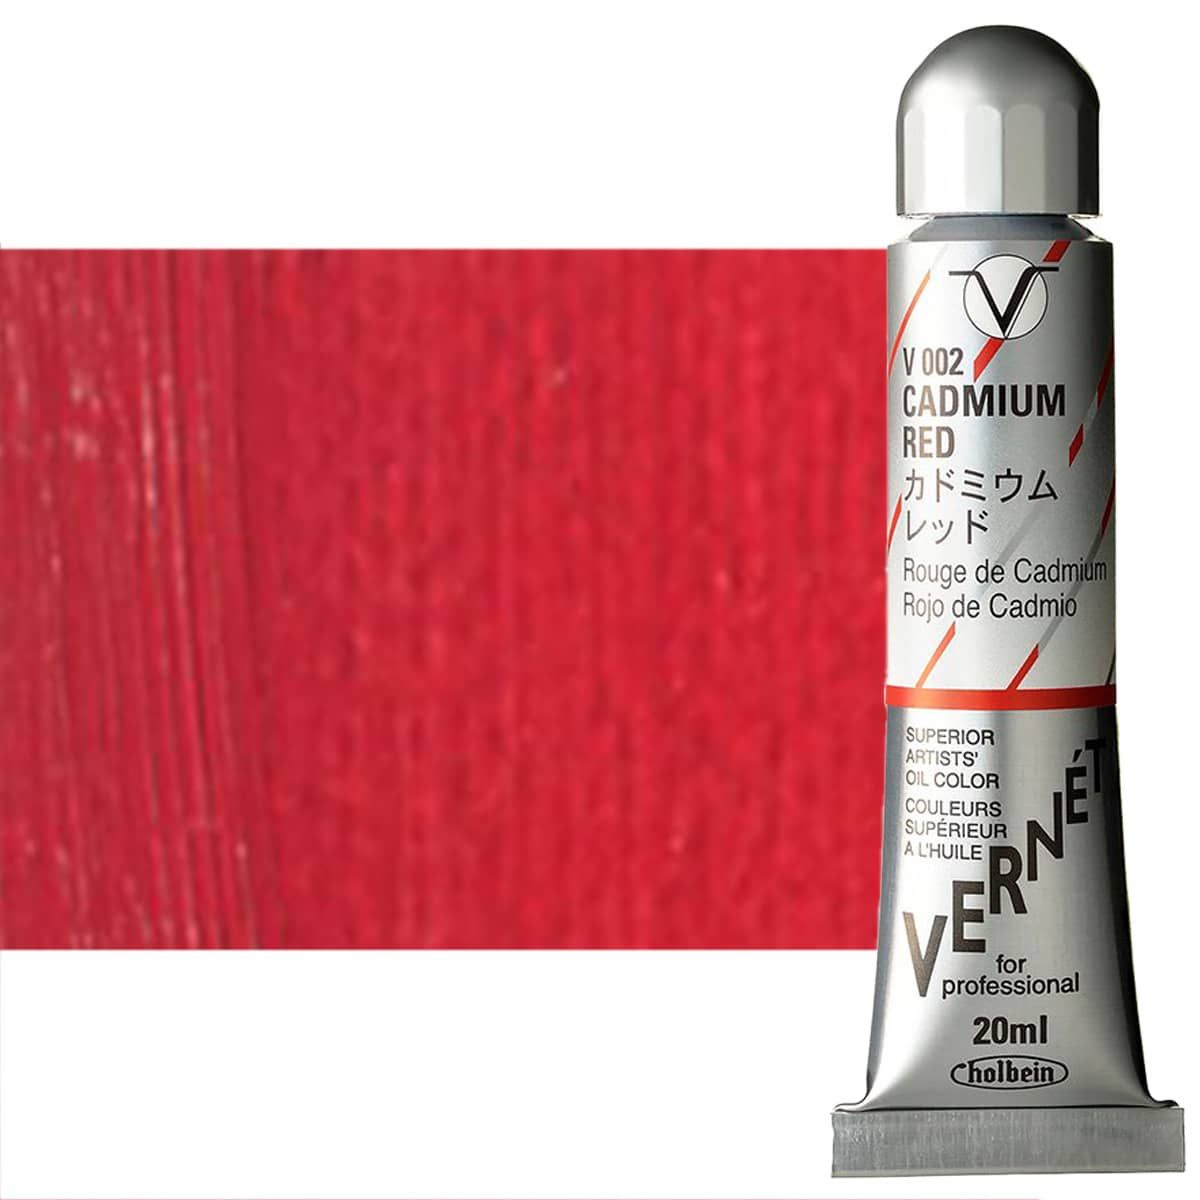 Holbein Vern?t Oil Color 20 ml Tube - Cadmium Red